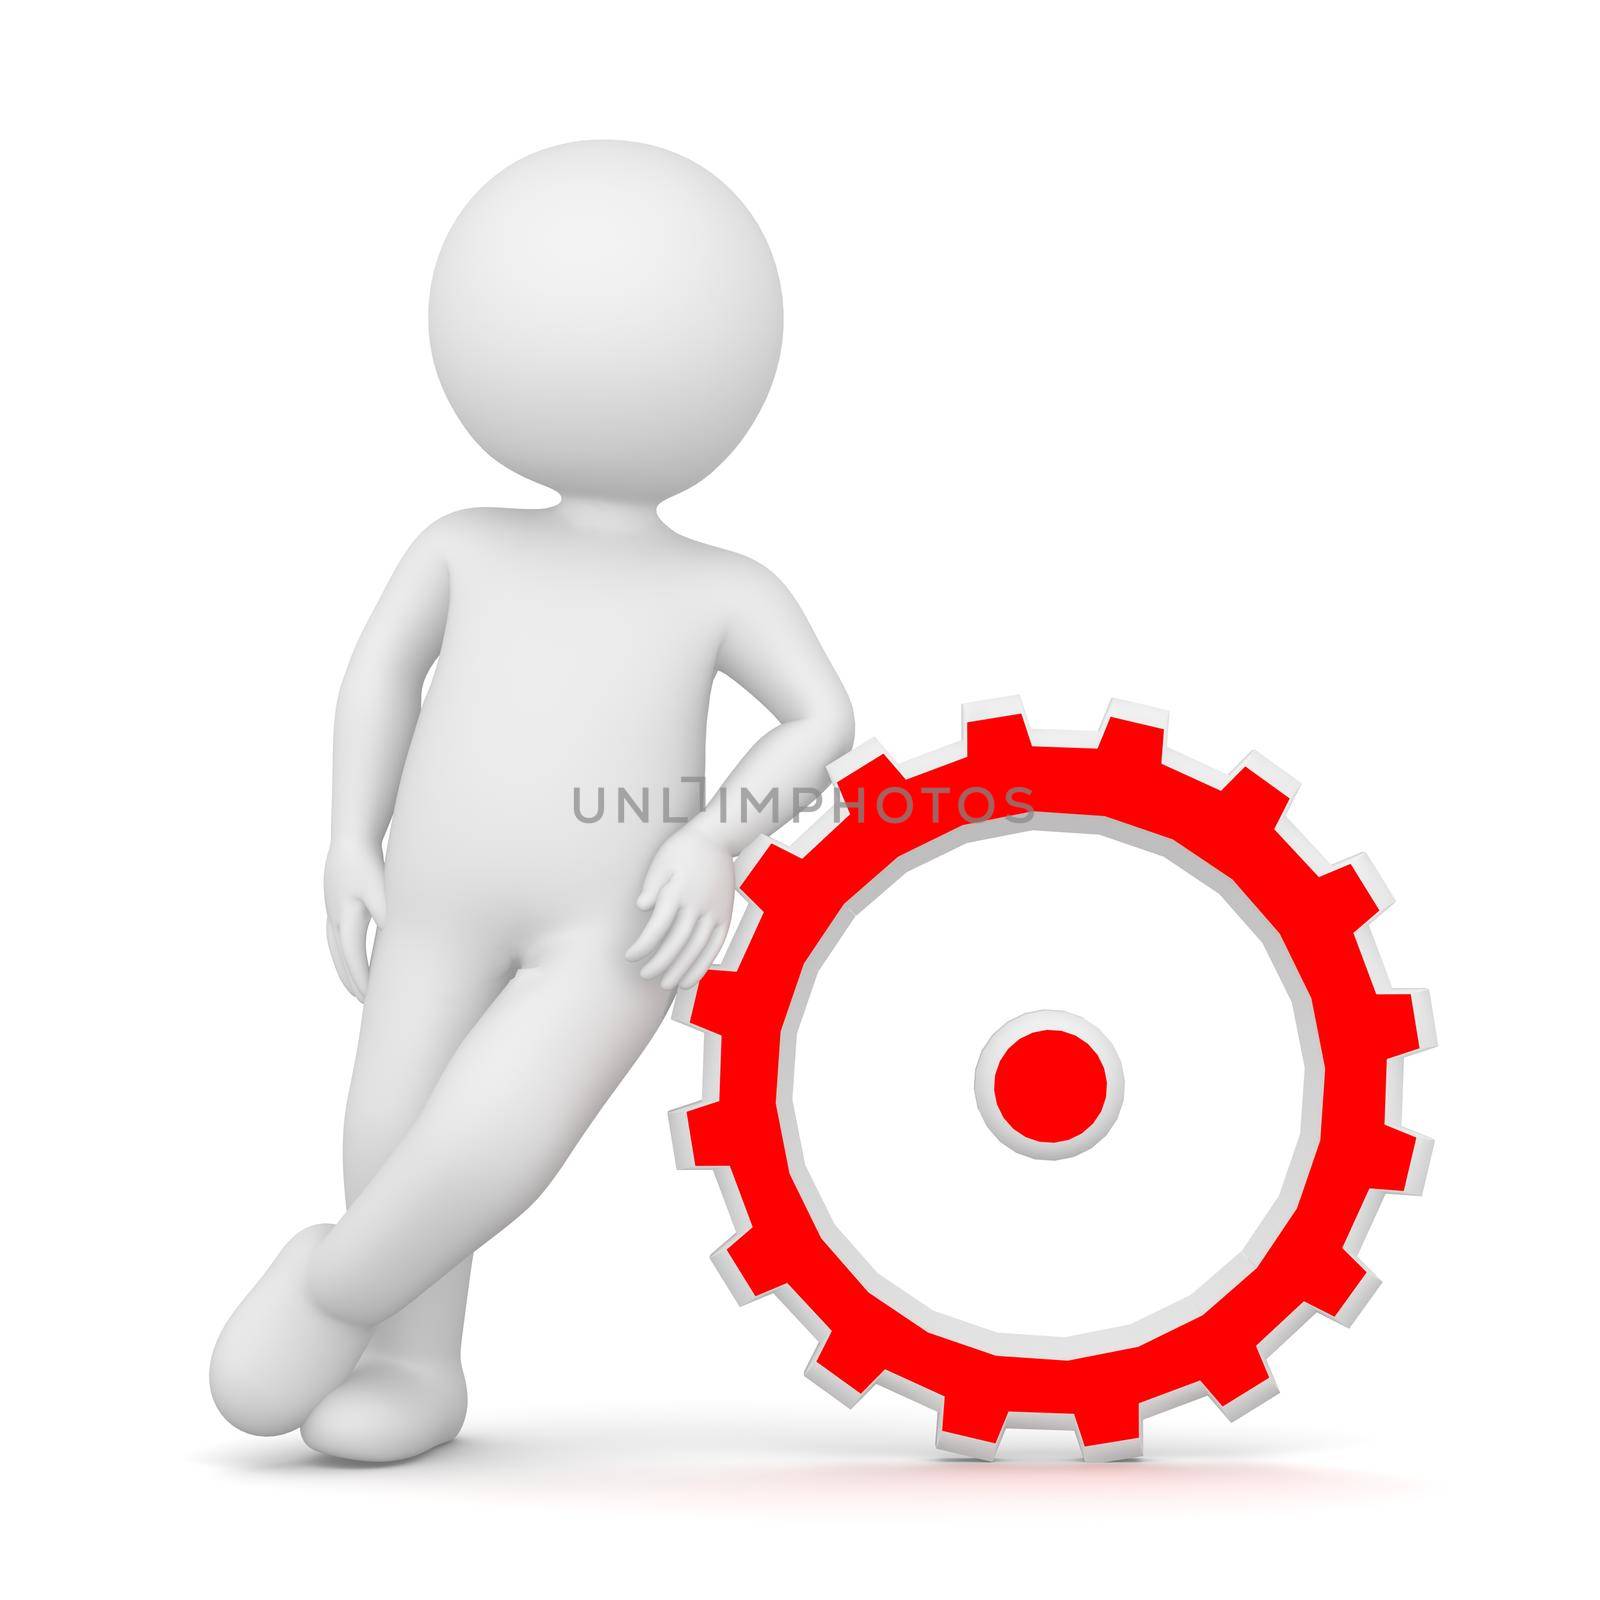 3D Rendering of a man leaning on a red cogwheel on white background